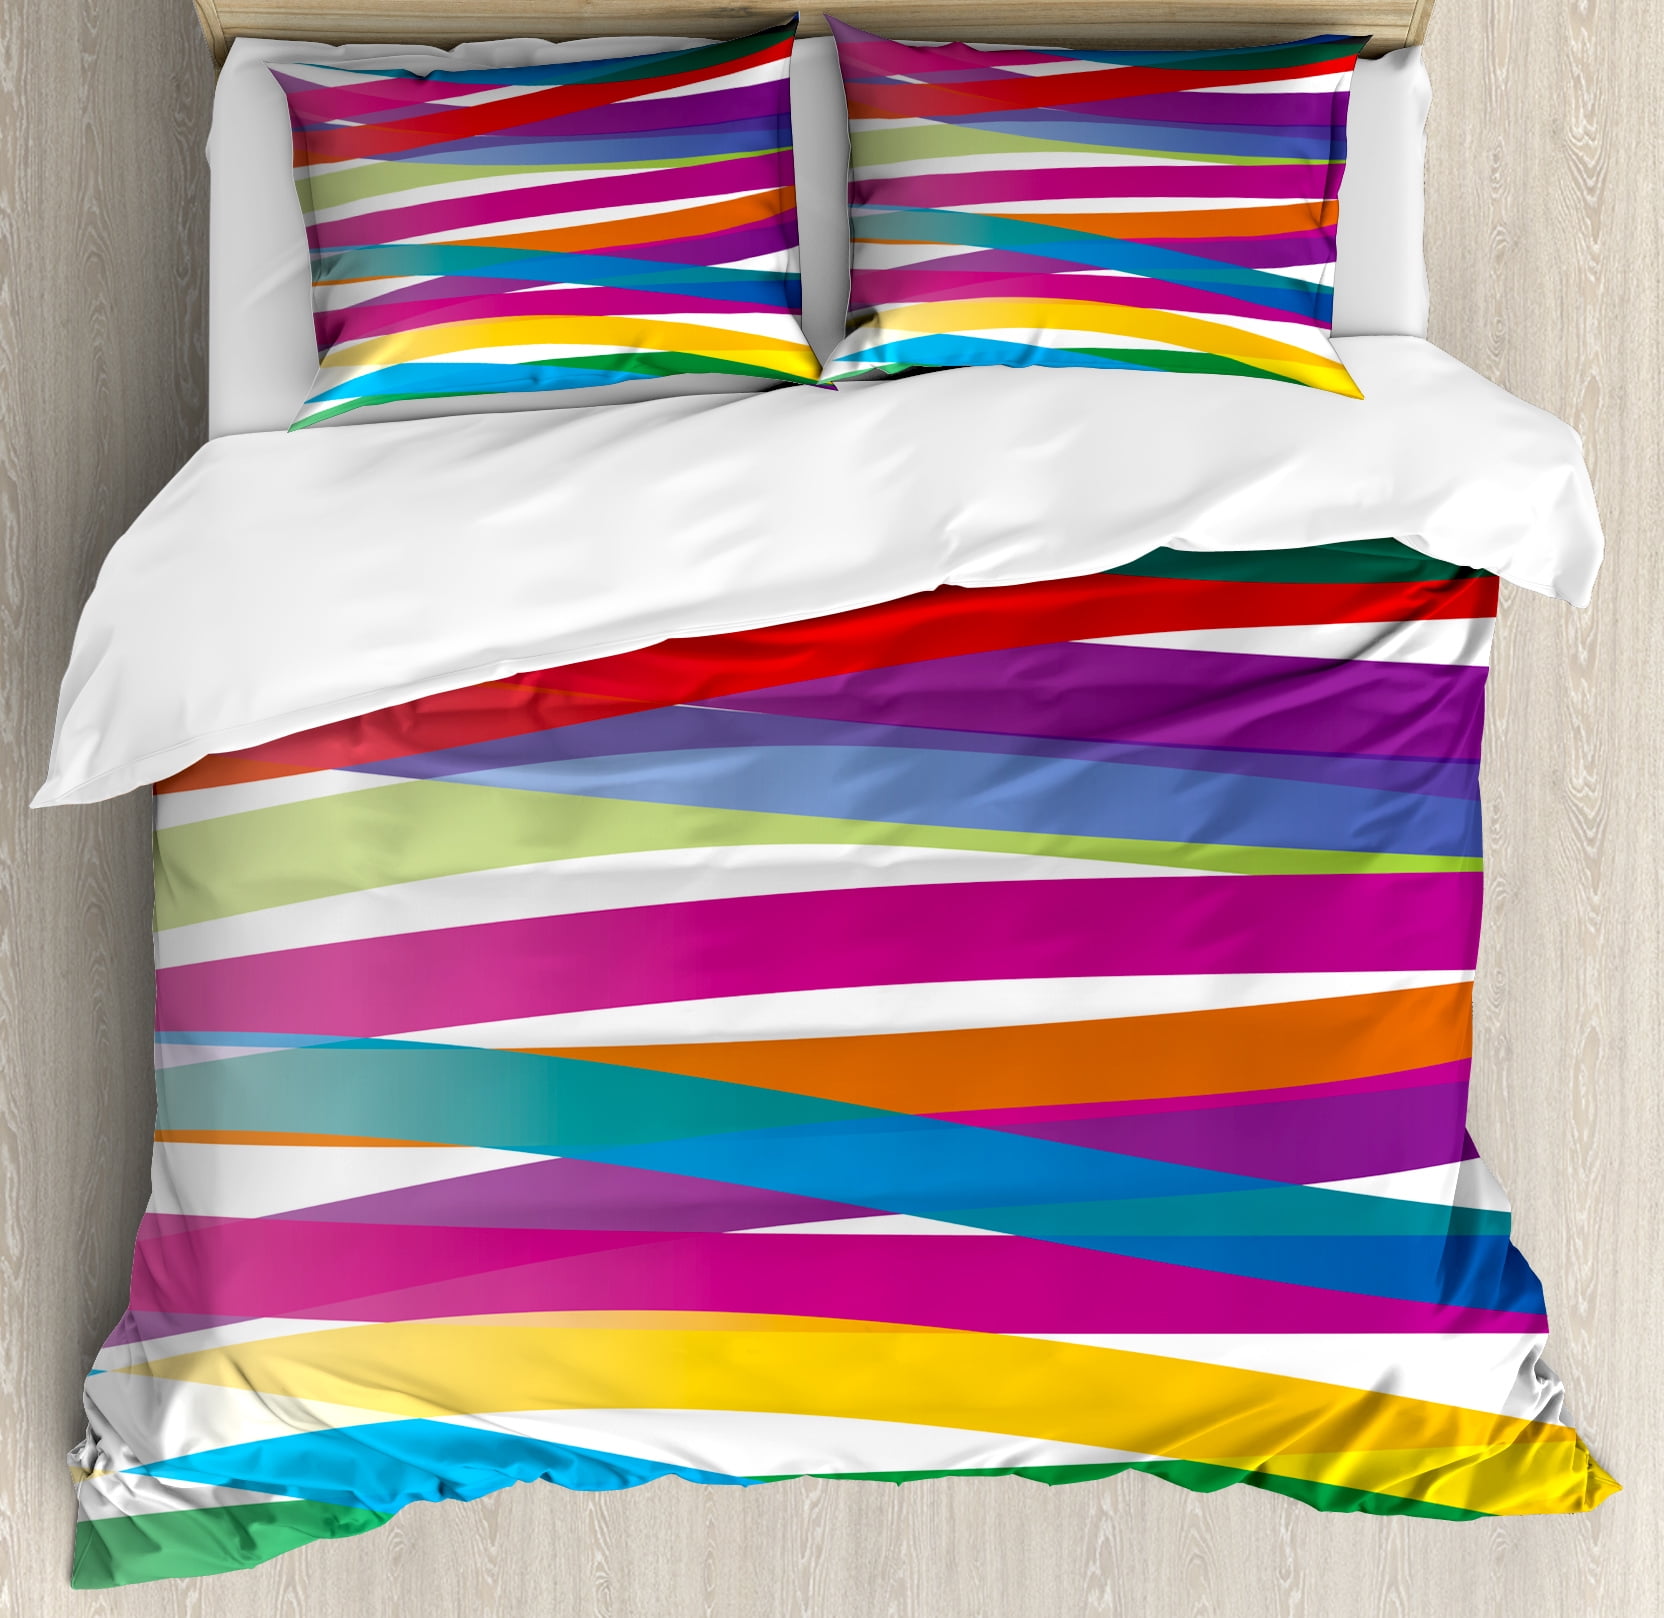 Colorful King Size Duvet Cover Set, Multicolor Ribbon Style Abstract ...